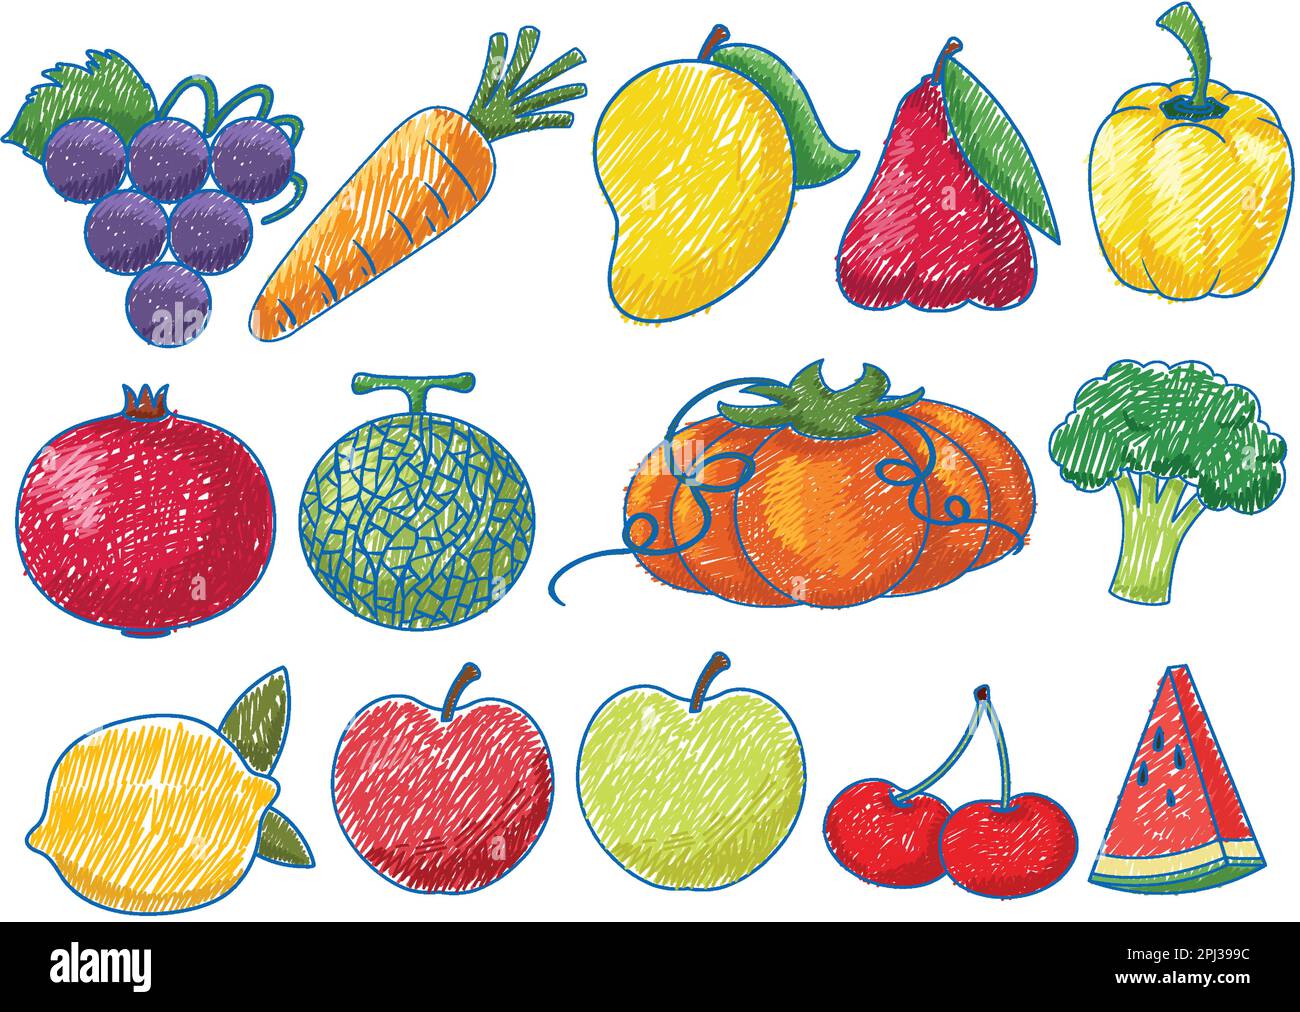 Let's Learn How to Draw Fruits : 11 Steps - Instructables